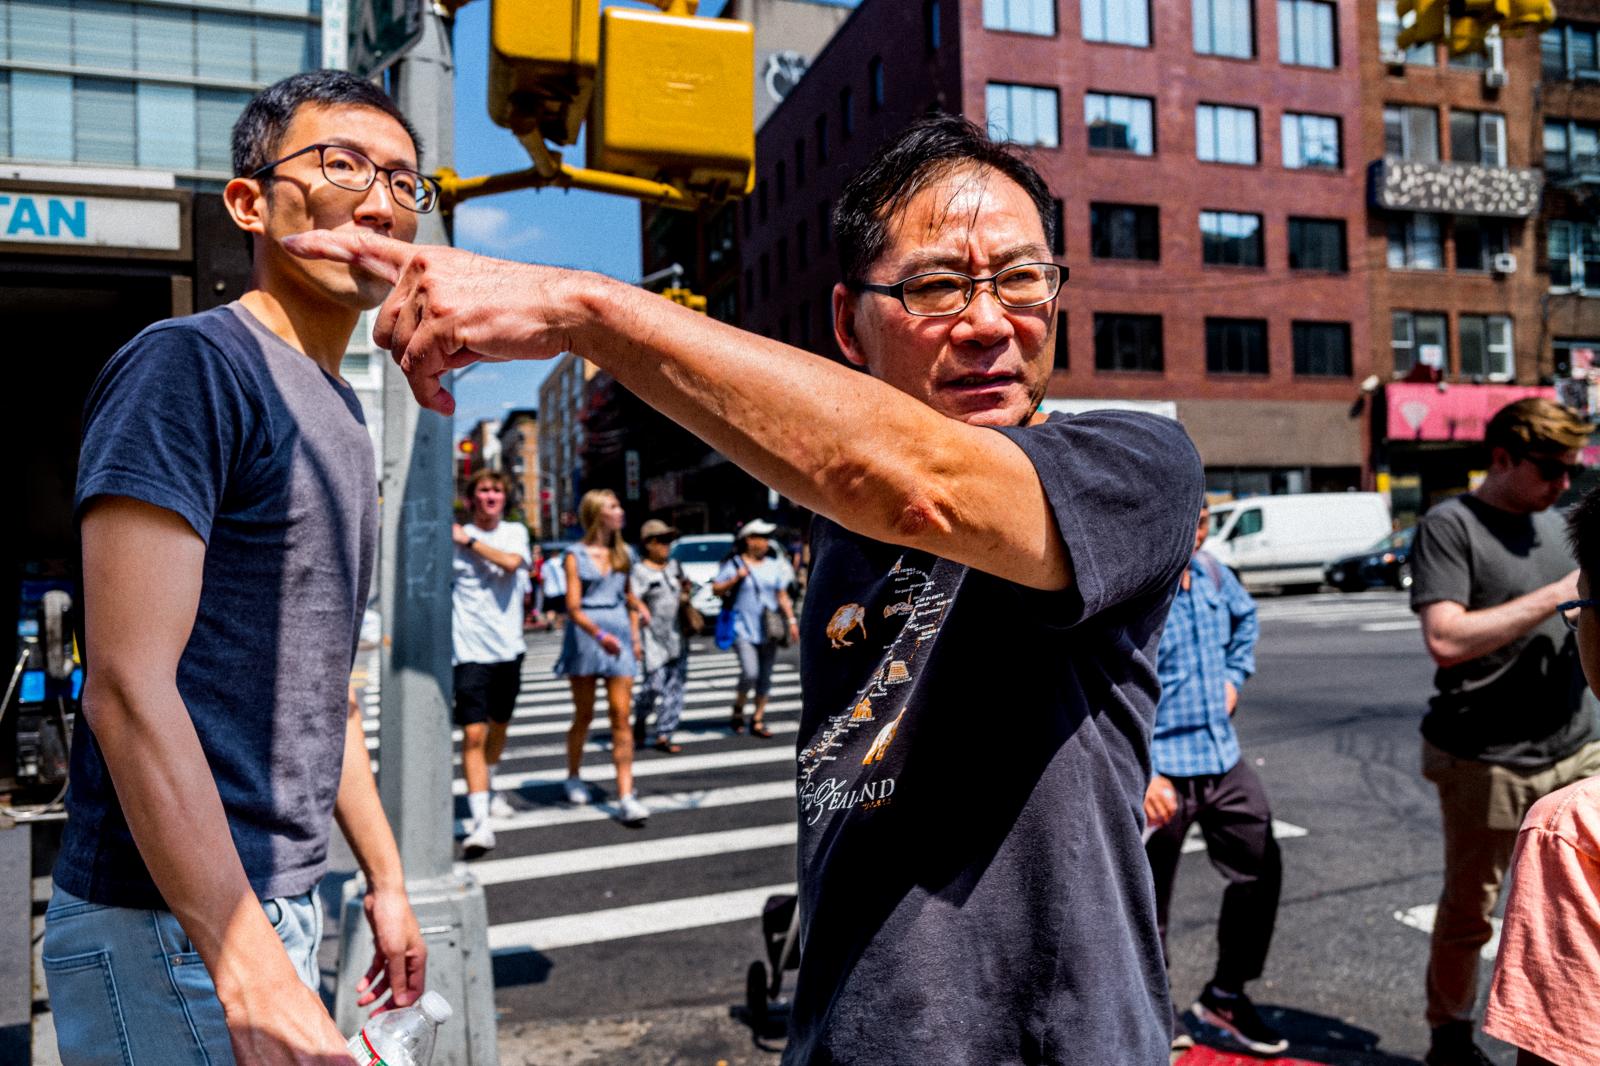 Image from Street Photography/Color Works -  Canal Street, Manhattan NYC  August 2018 